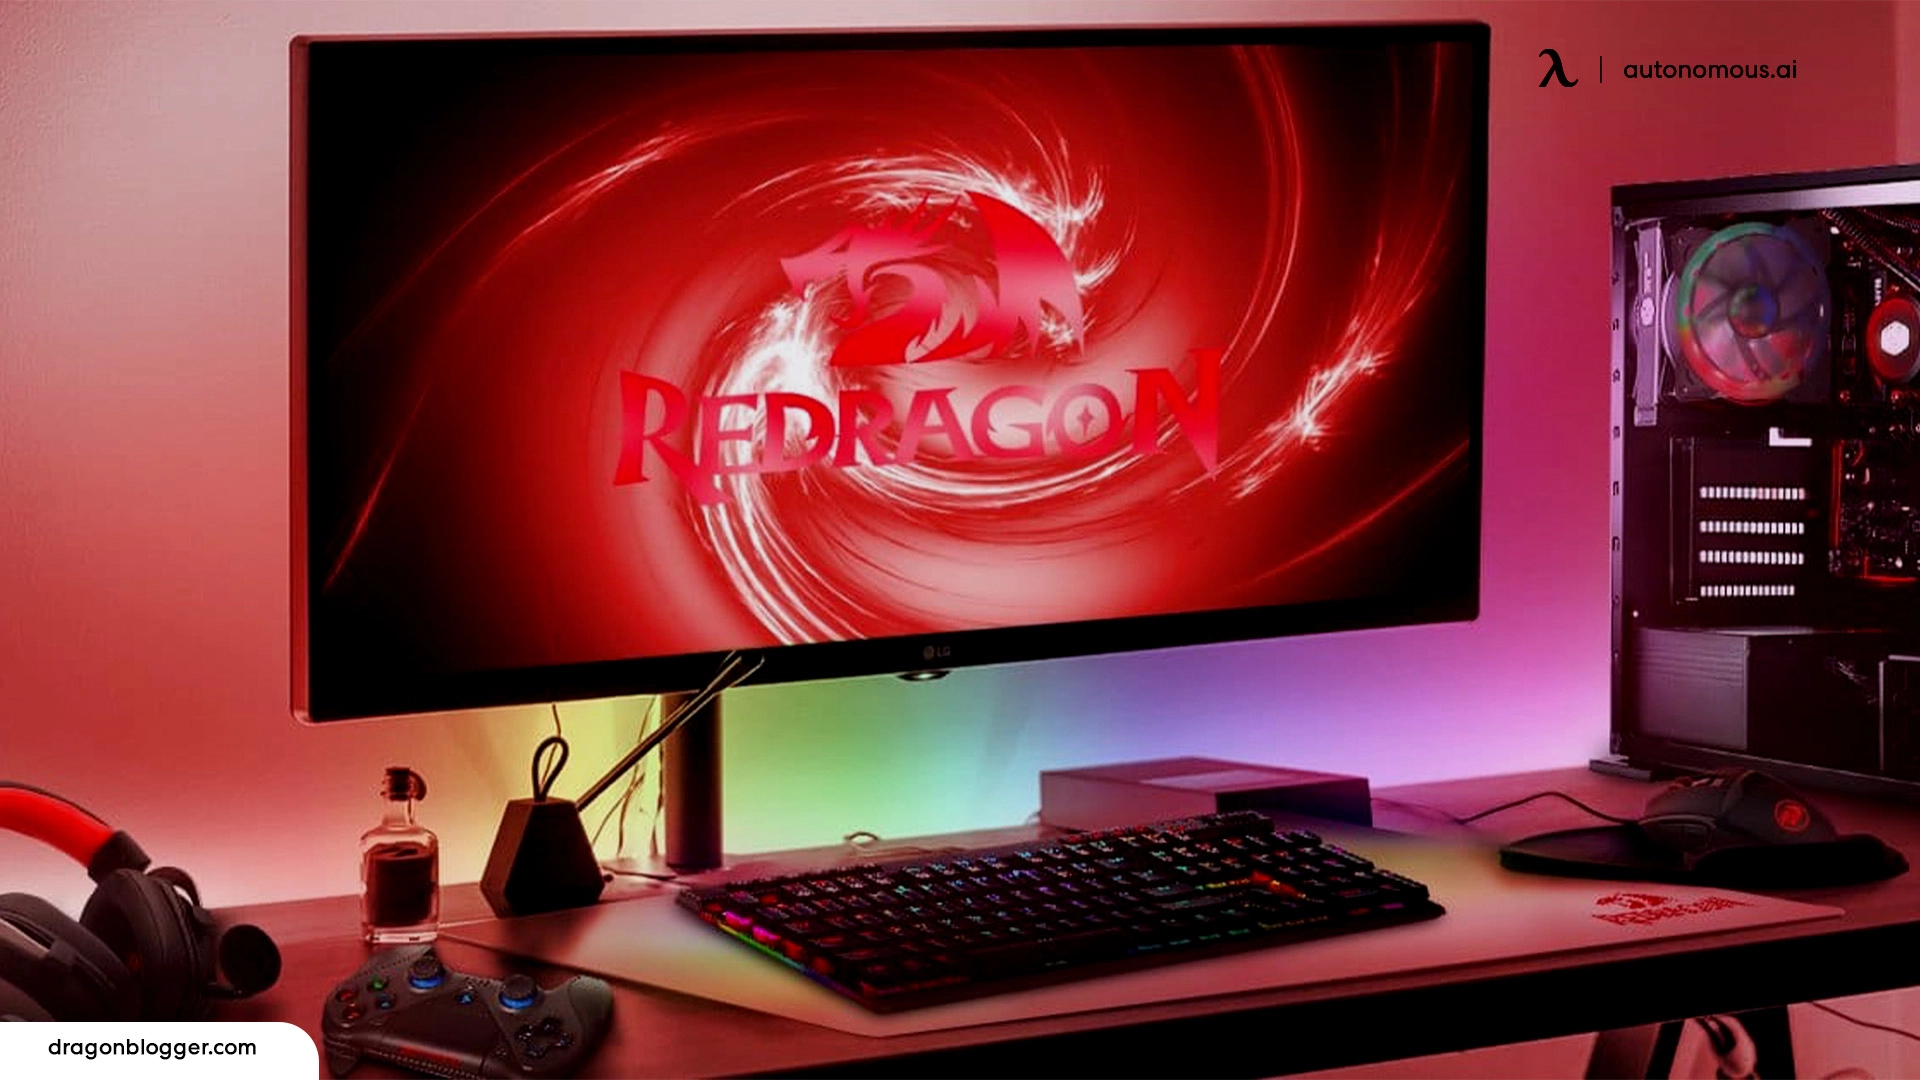 How to Install Redragon Keyboard software on Windows 10 and Mac?